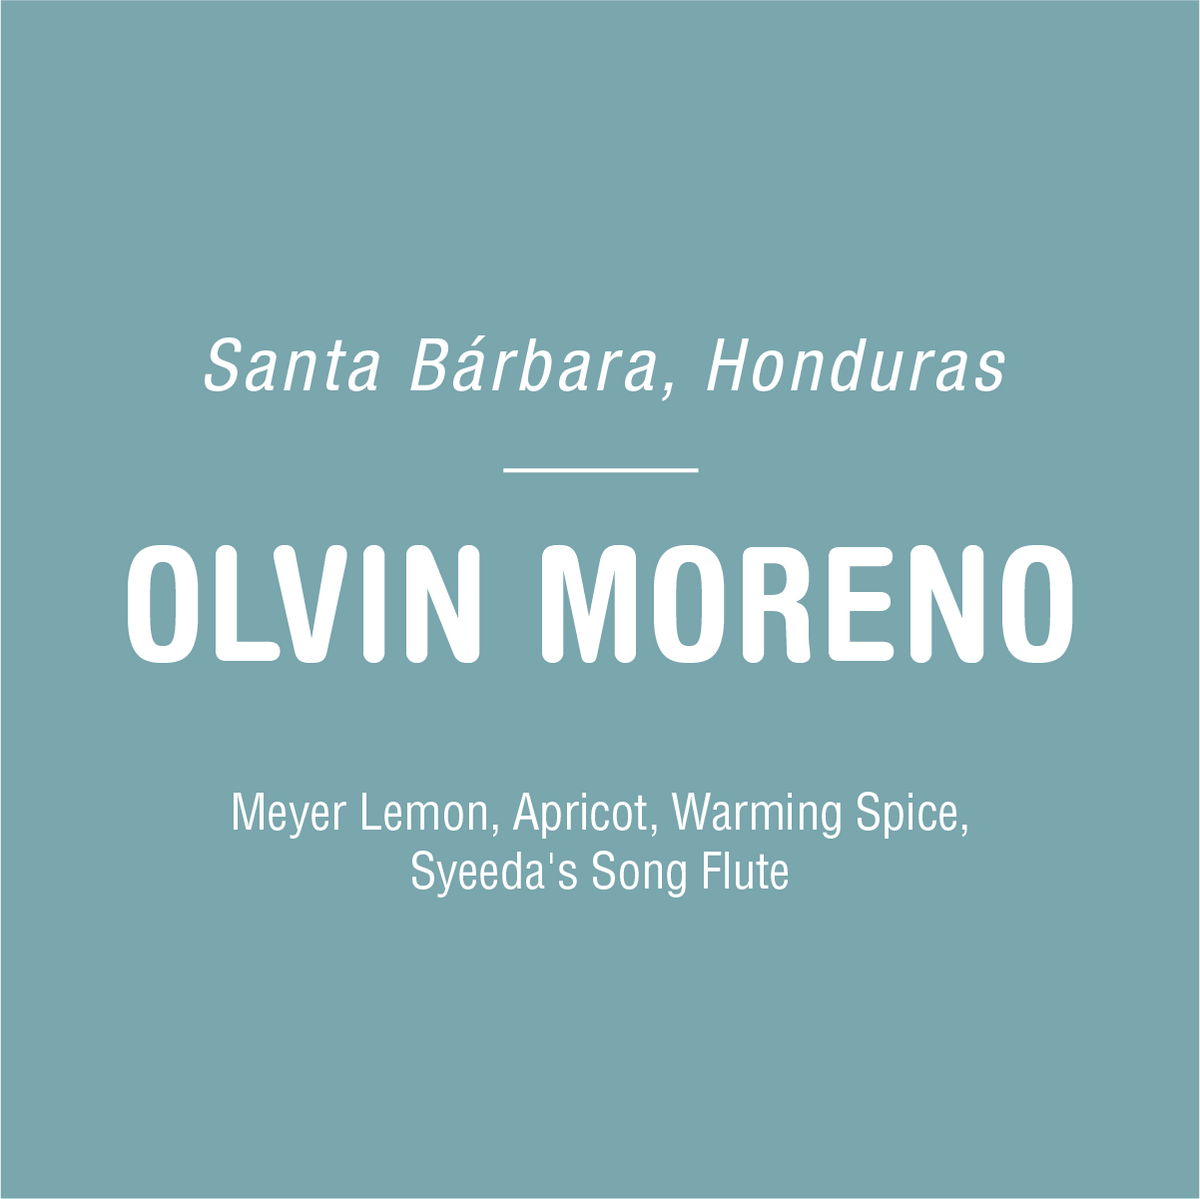 A teal background with white text that reads: "Santa Bárbara, Honduras" followed by "OLVIN MORENO - HONDURAS" in large bold letters. Below, in smaller text: "Meyer Lemon, Apricot, Warming Spice, Syeeda's Song Flute." A tribute to unique coffees and the art of coffee cultivation by Tandem Coffee Roasters.